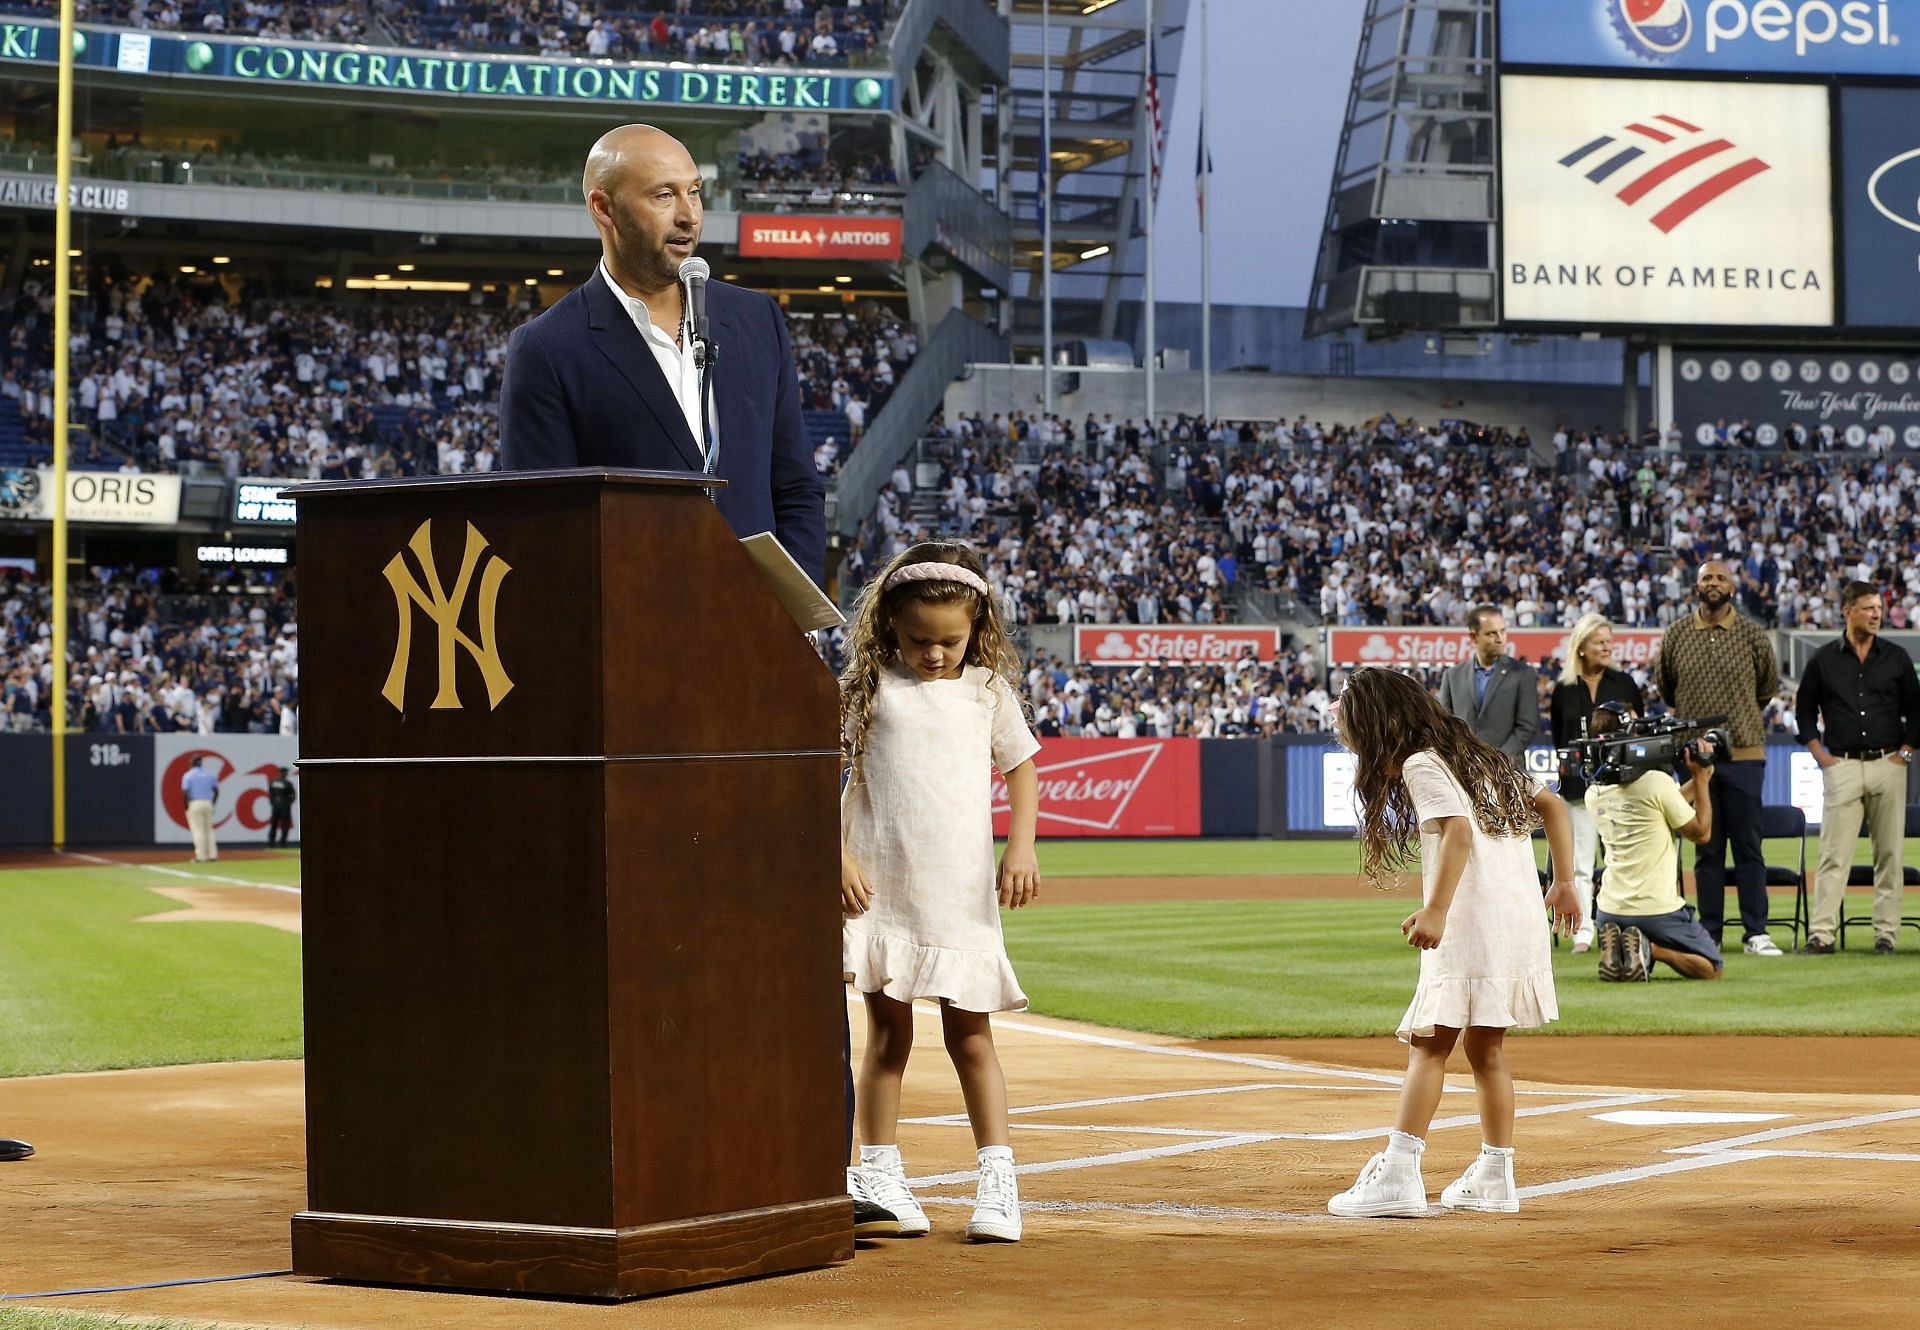 Hamill: Even Mets fans can agree, Derek Jeter was a player worthy of  admiration — particularly for his taste in women – New York Daily News